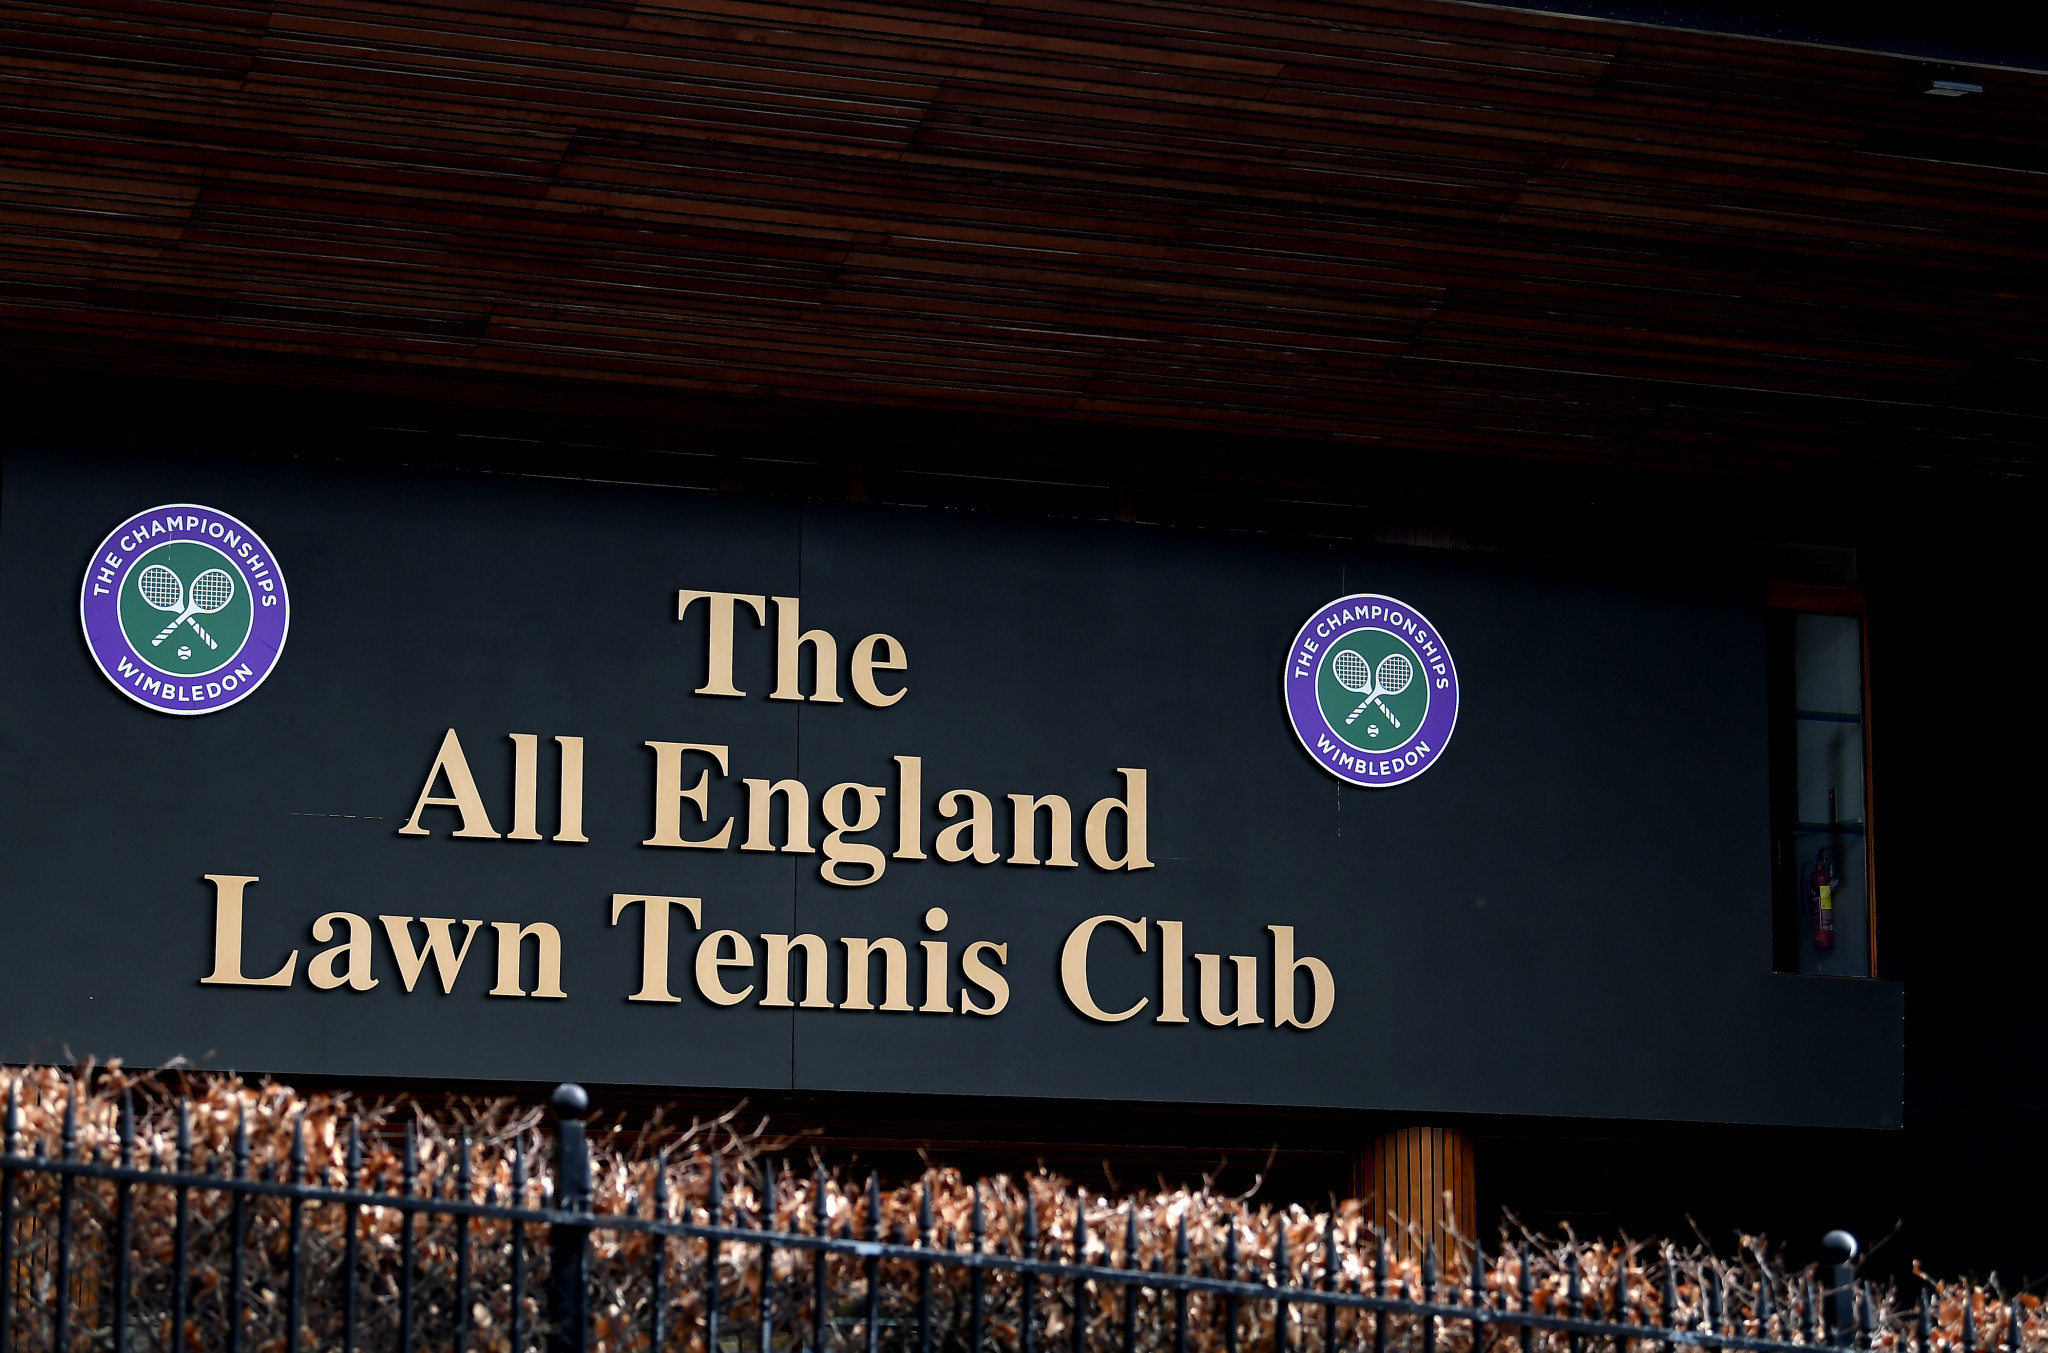  All England Lawn Tennis Club announce series of contributions to support pandemic recovery